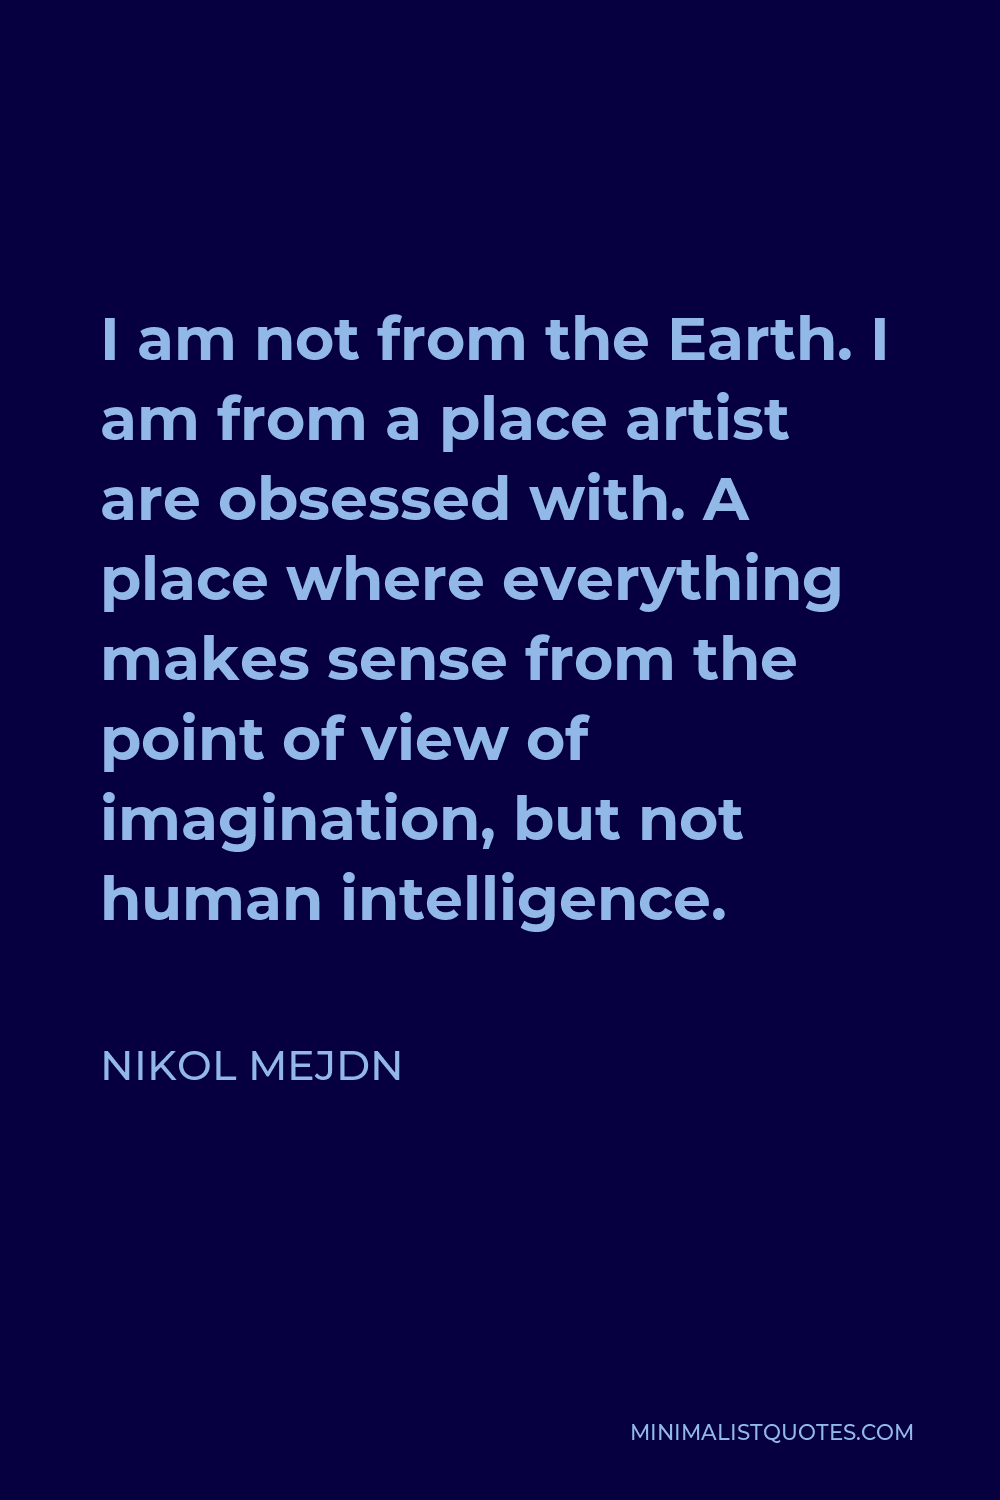 Nikol Mejdn Quote - I am not from the Earth. I am from a place artist are obsessed with. A place where everything makes sense from the point of view of imagination, but not human intelligence.